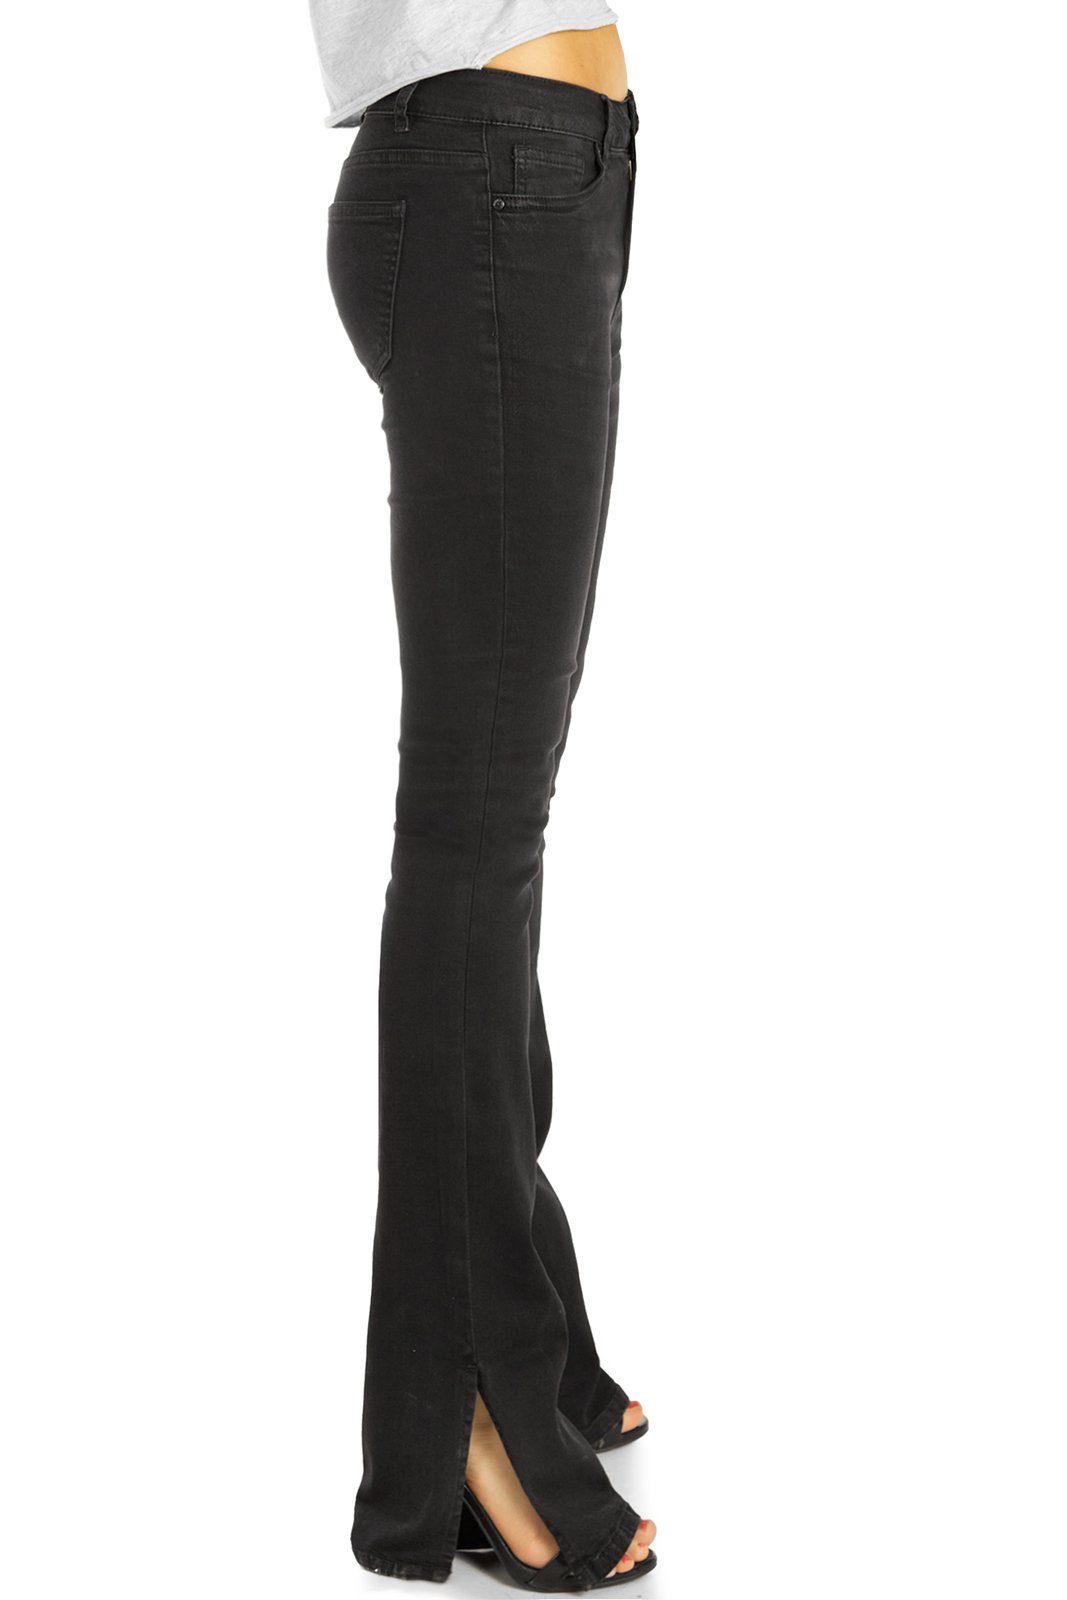 be styled Bootcut-Jeans Bootcut Jeans j27r Hose - out mit - Damen cut 5-Pocket-Style waist mit Stretch-Anteil, mid